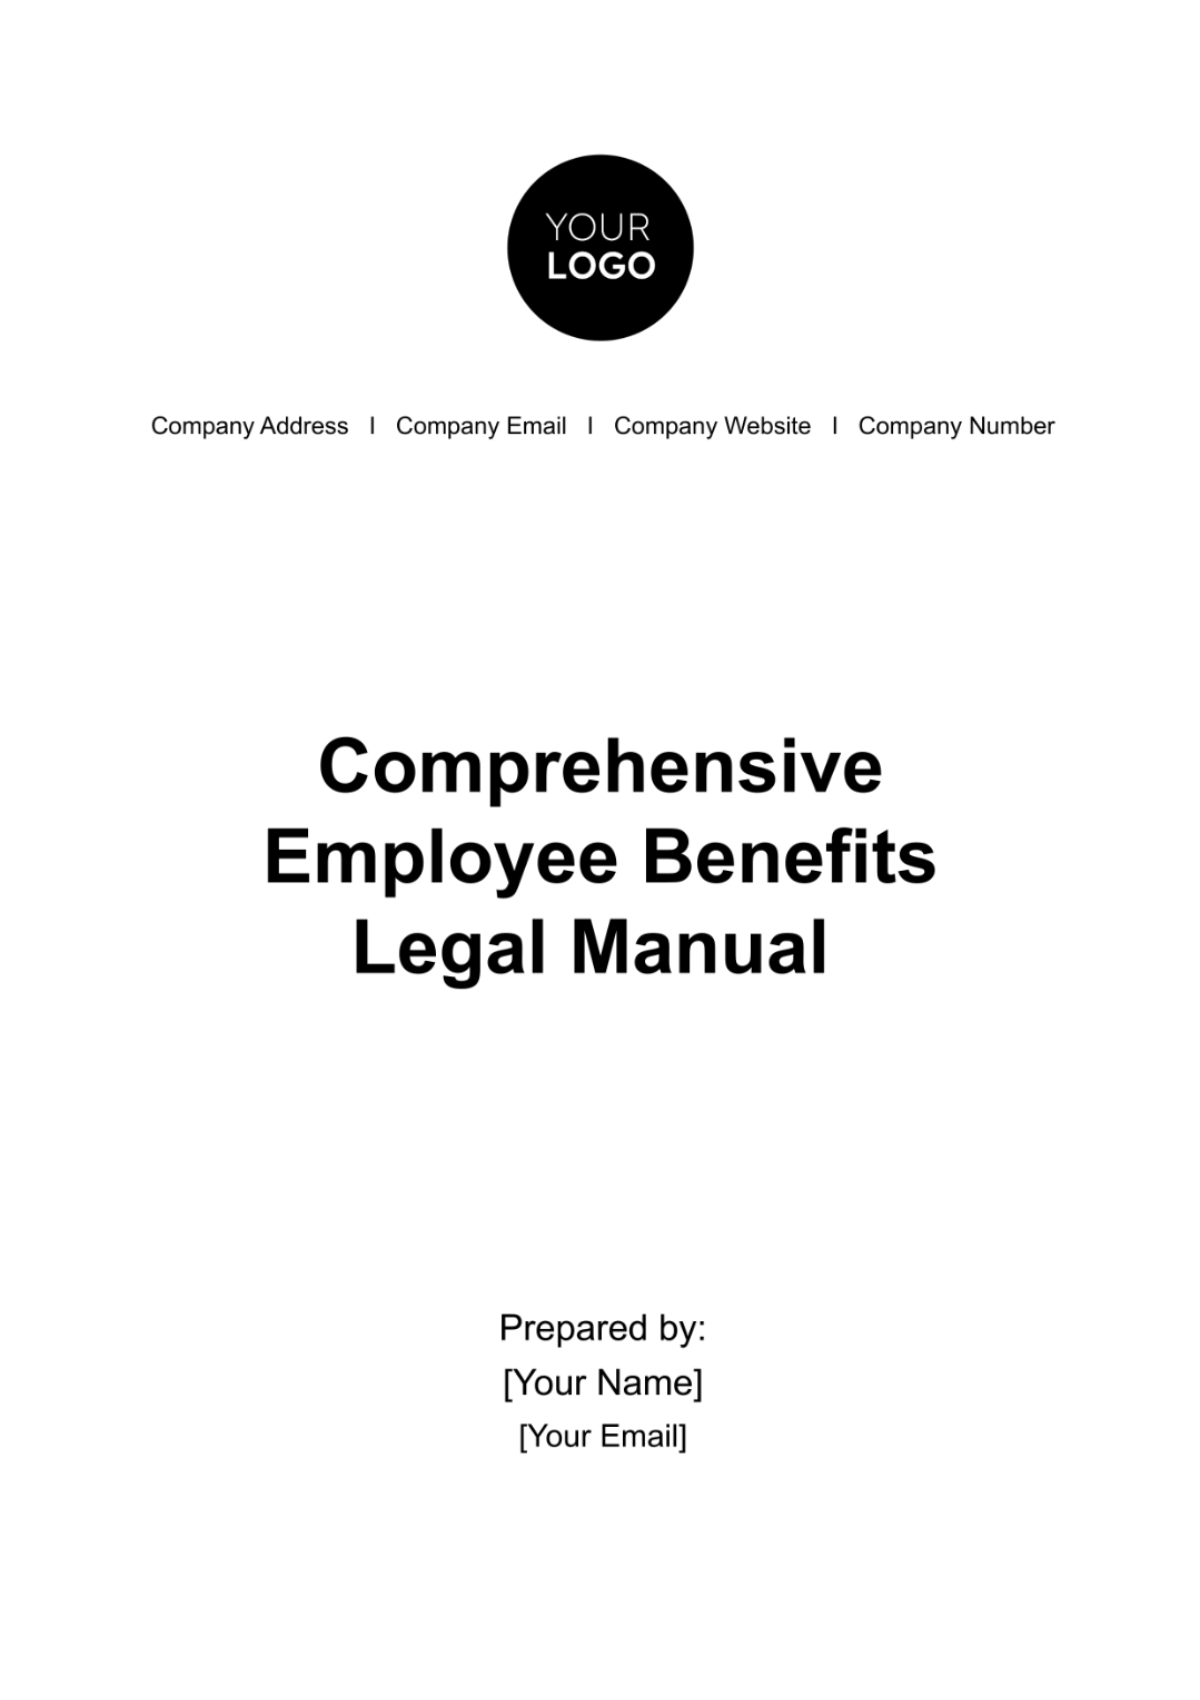 Comprehensive Employee Benefits Legal Manual HR Template